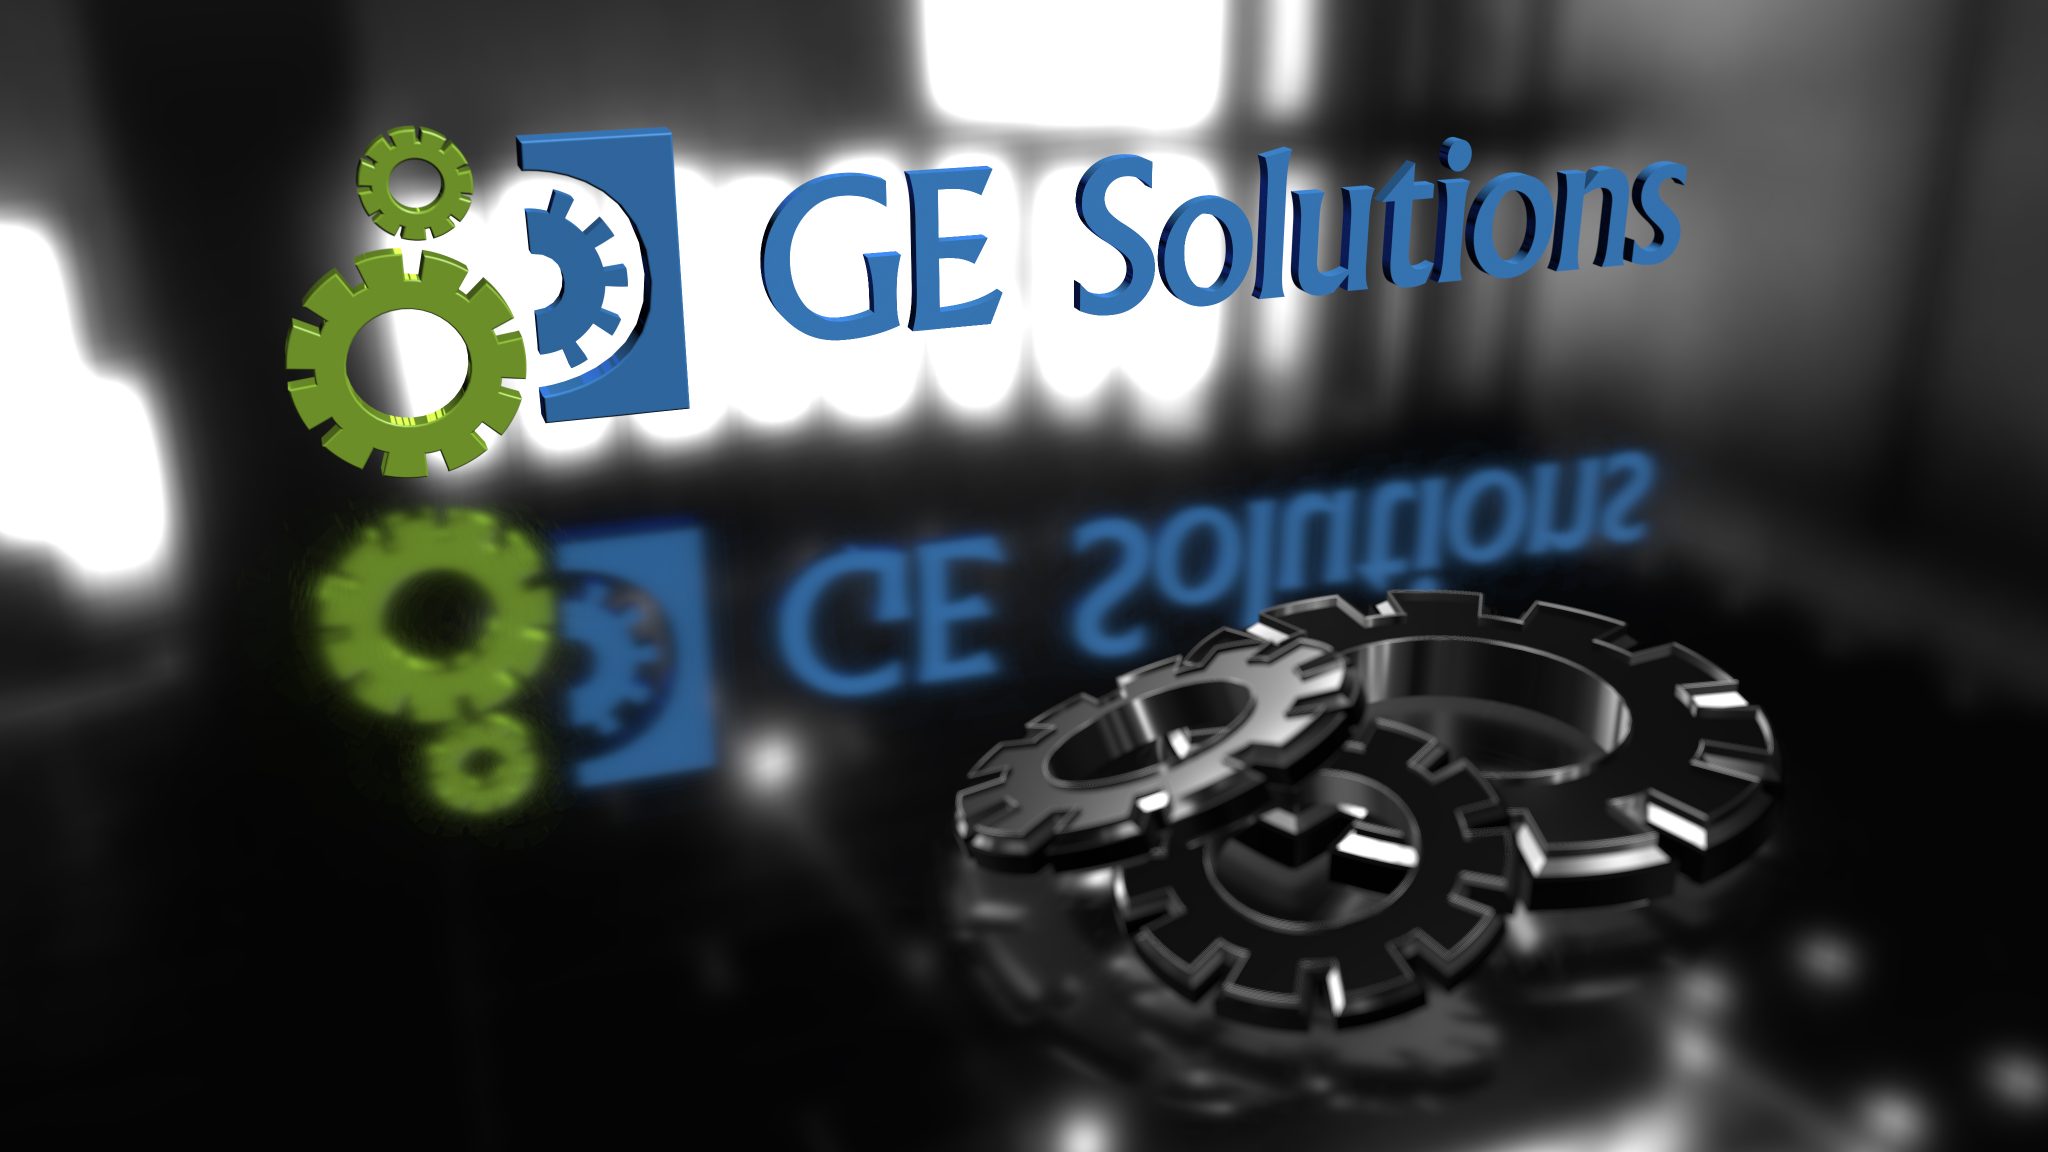 GE-Solutions achtergrond